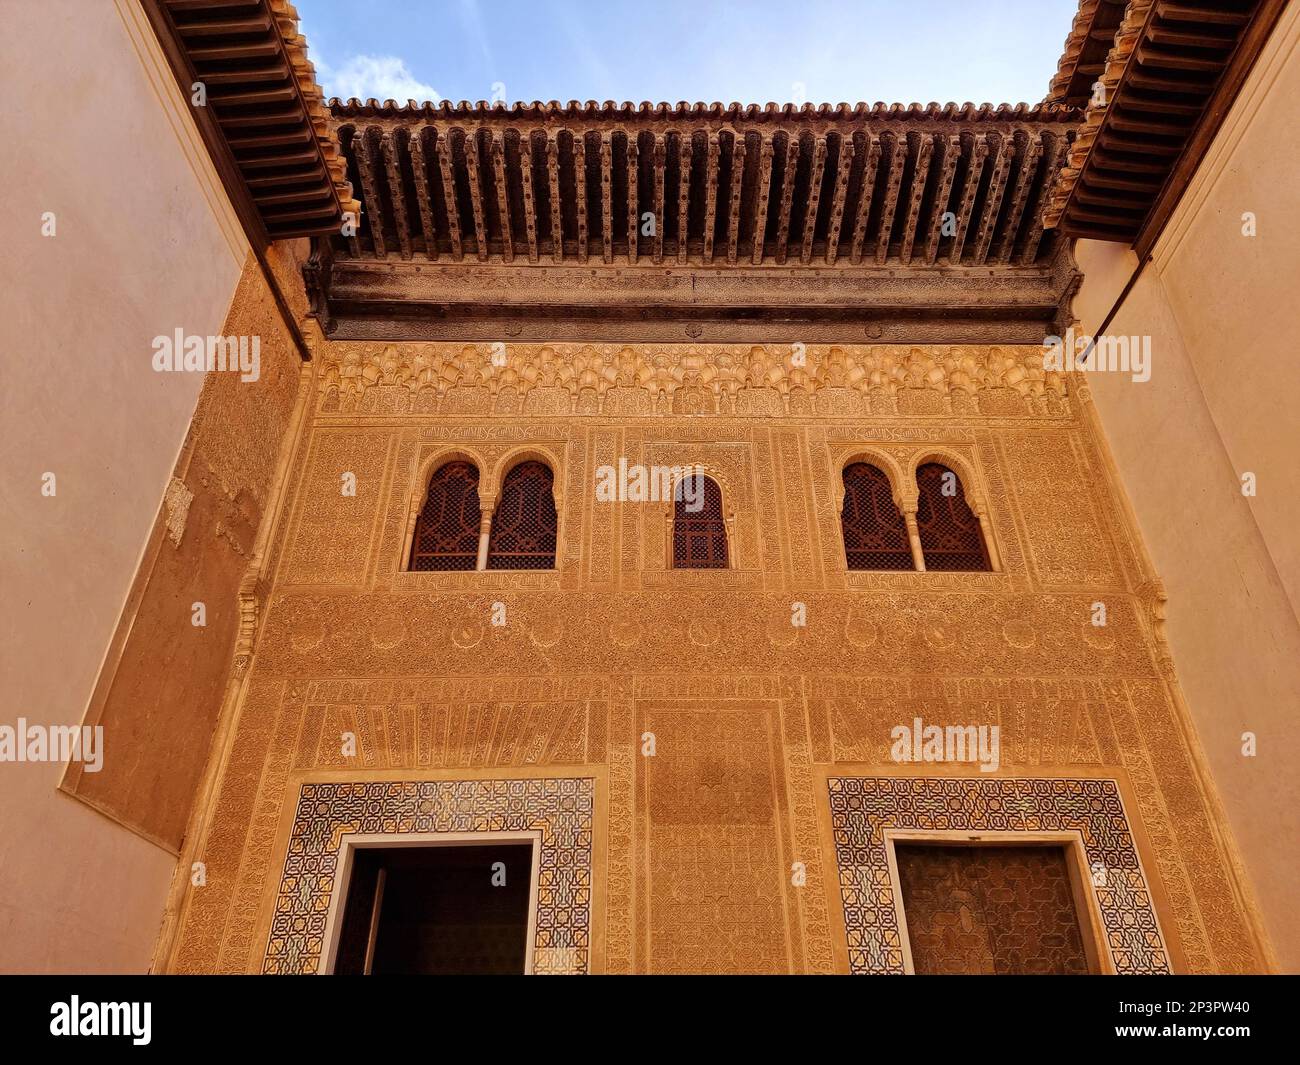 The highlight of Alhambra, the Nasrid Palace is a beautiful mansion that was built for the Spanish Muslim With its perfectly proportional rooms, breathtaking symmetry, intricately detailed stucco walls, antique wooden